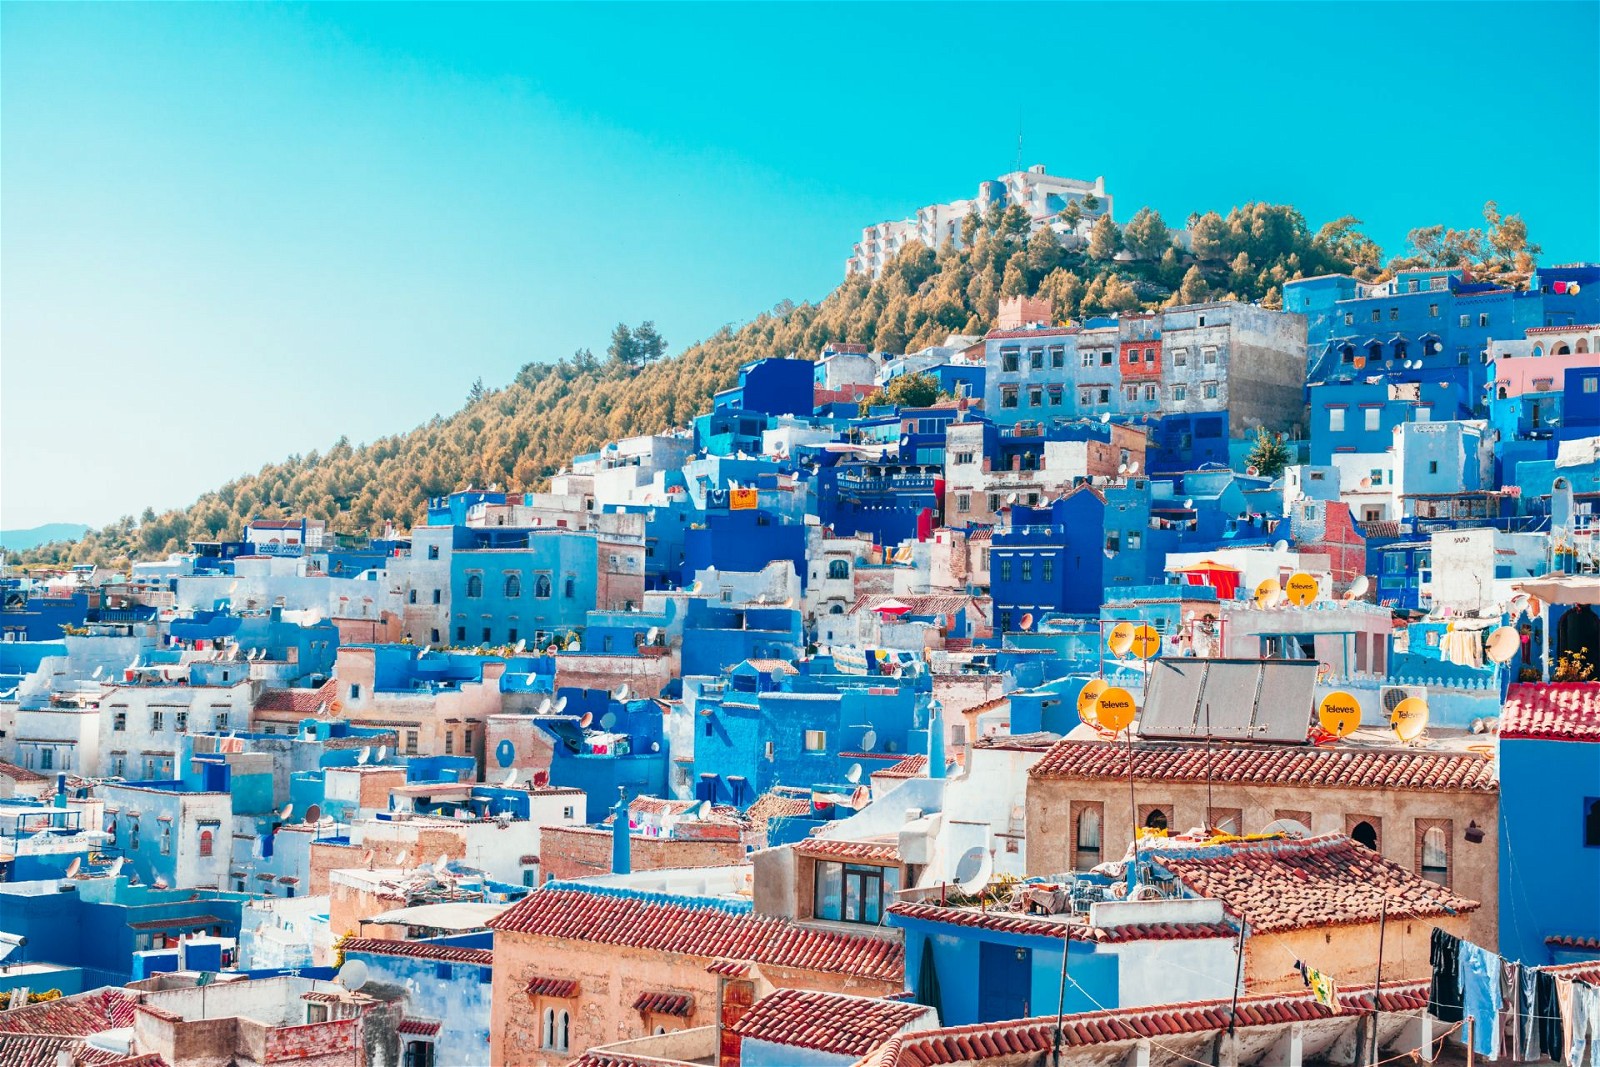 Morocco is a country with diverse landscapes and a wealth of tourist attractions. From bustling cities to serene deserts, from lush valleys to coastal towns, Morocco has something for everyone. Here are some must-visit destinations and attractions to include in your itinerary: